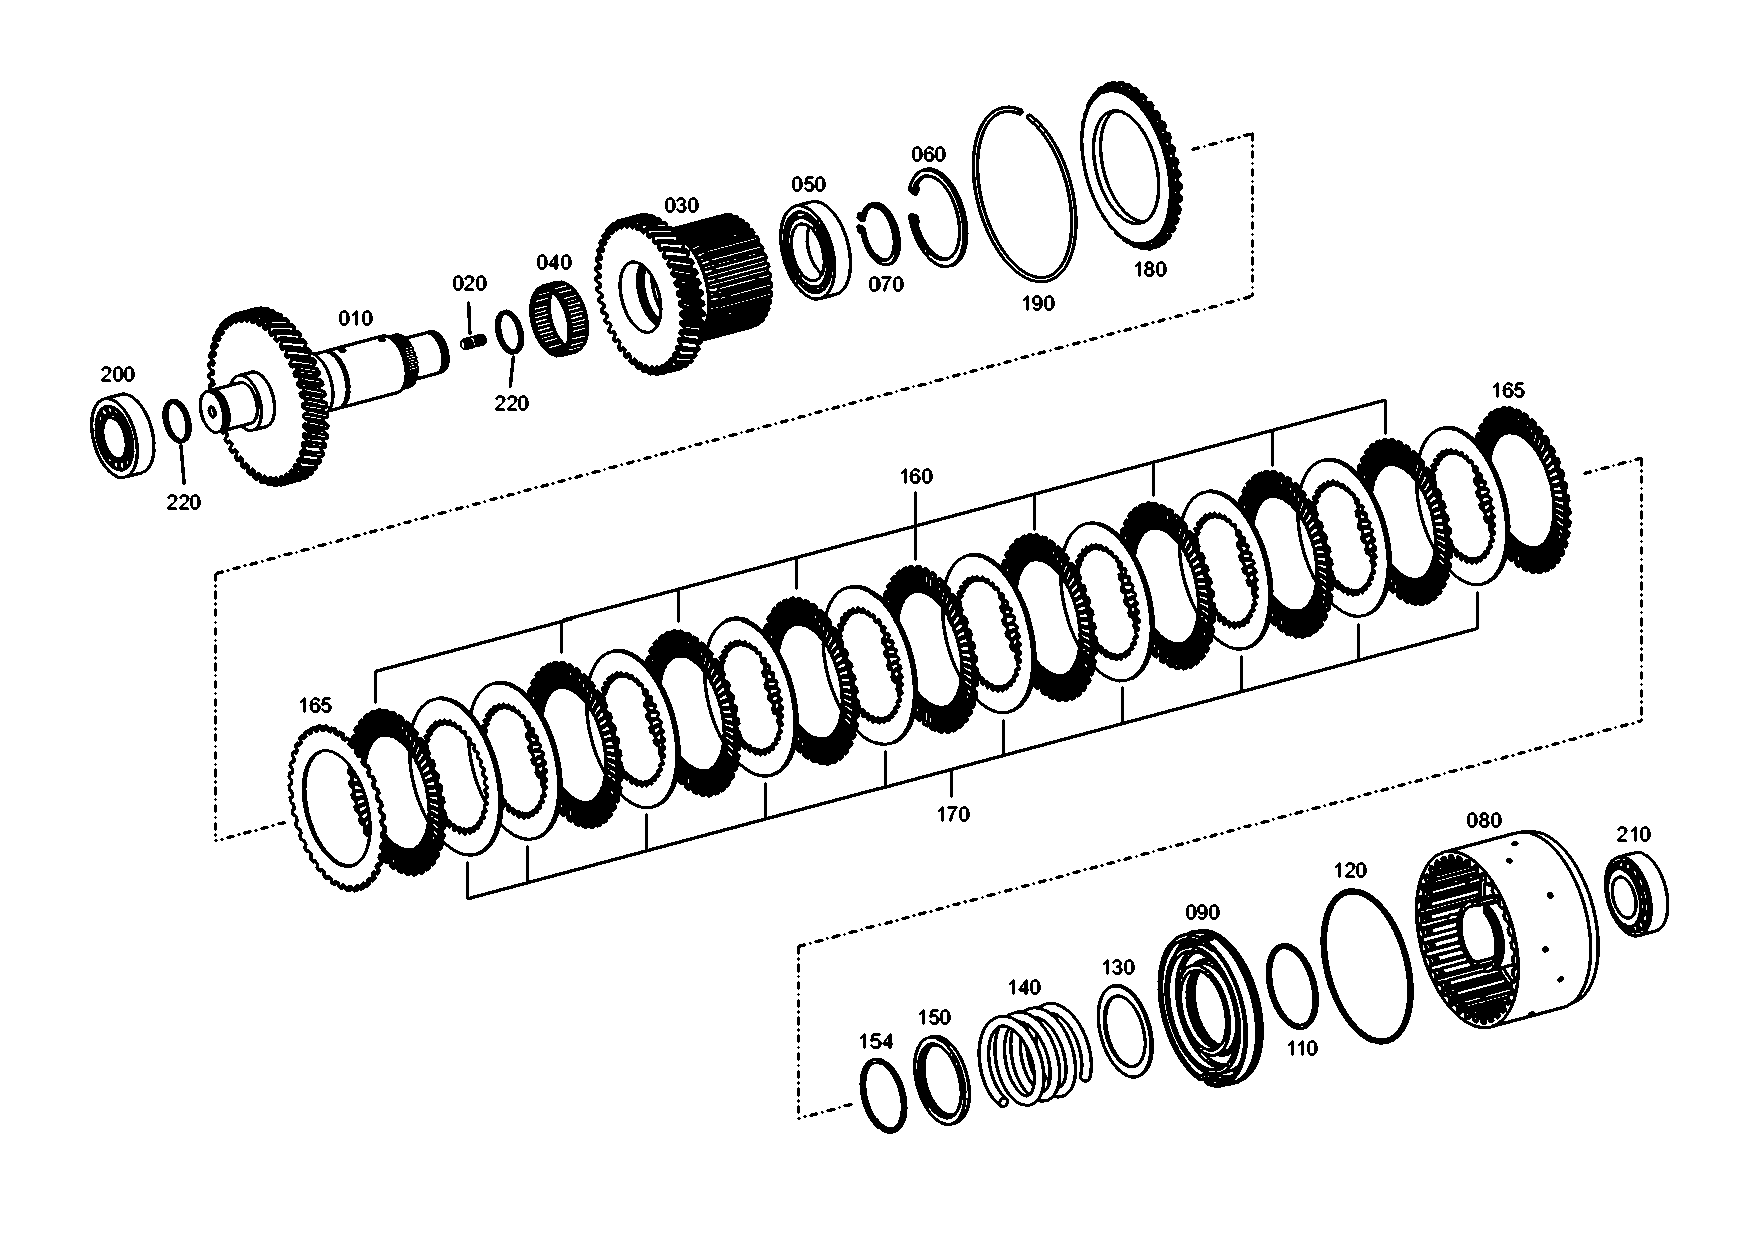 drawing for PPM 6089205 - WASHER (figure 1)